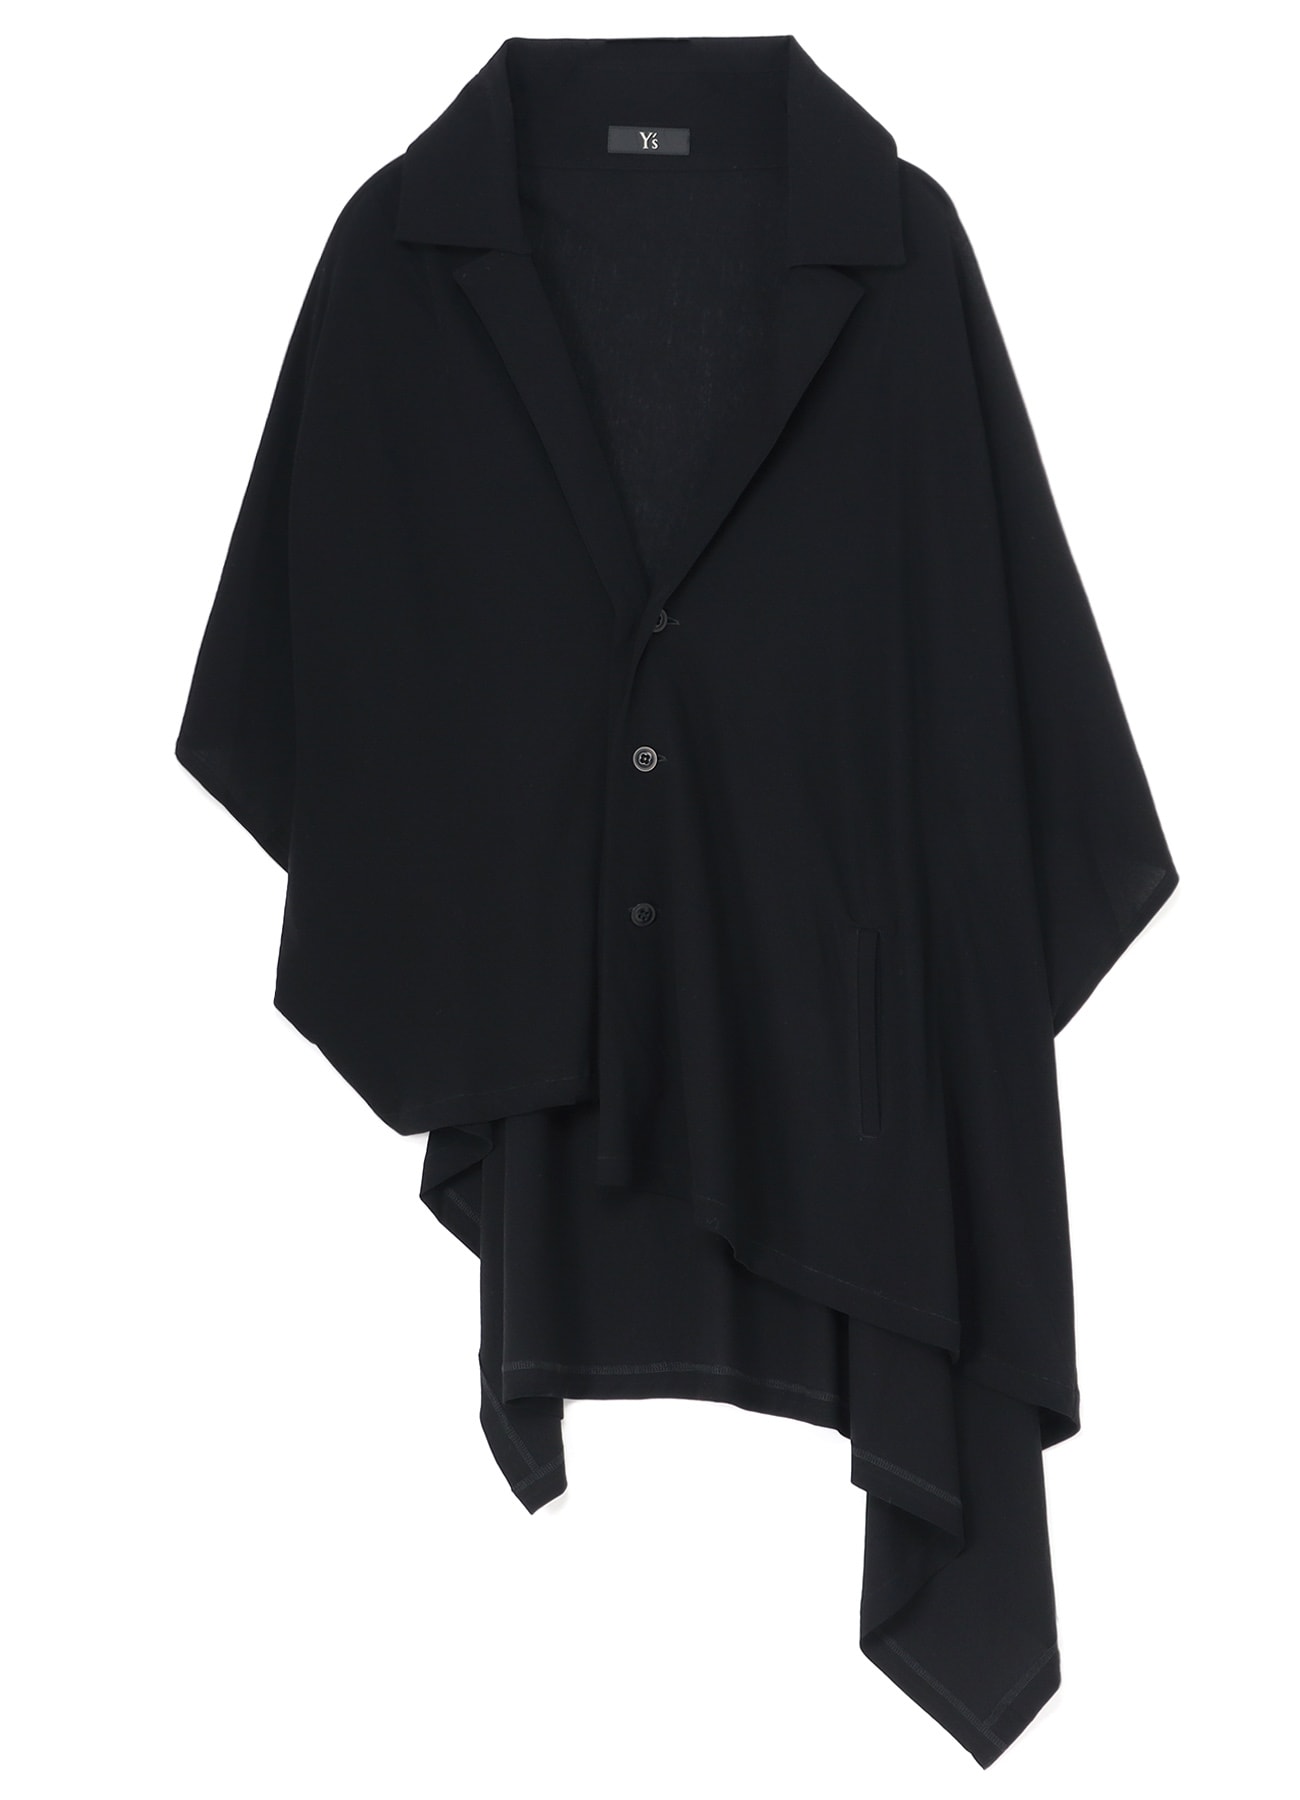 HARD TWISTED COTTON JERSEY JACKET CARDIGAN(S Black): Y's｜THE SHOP 